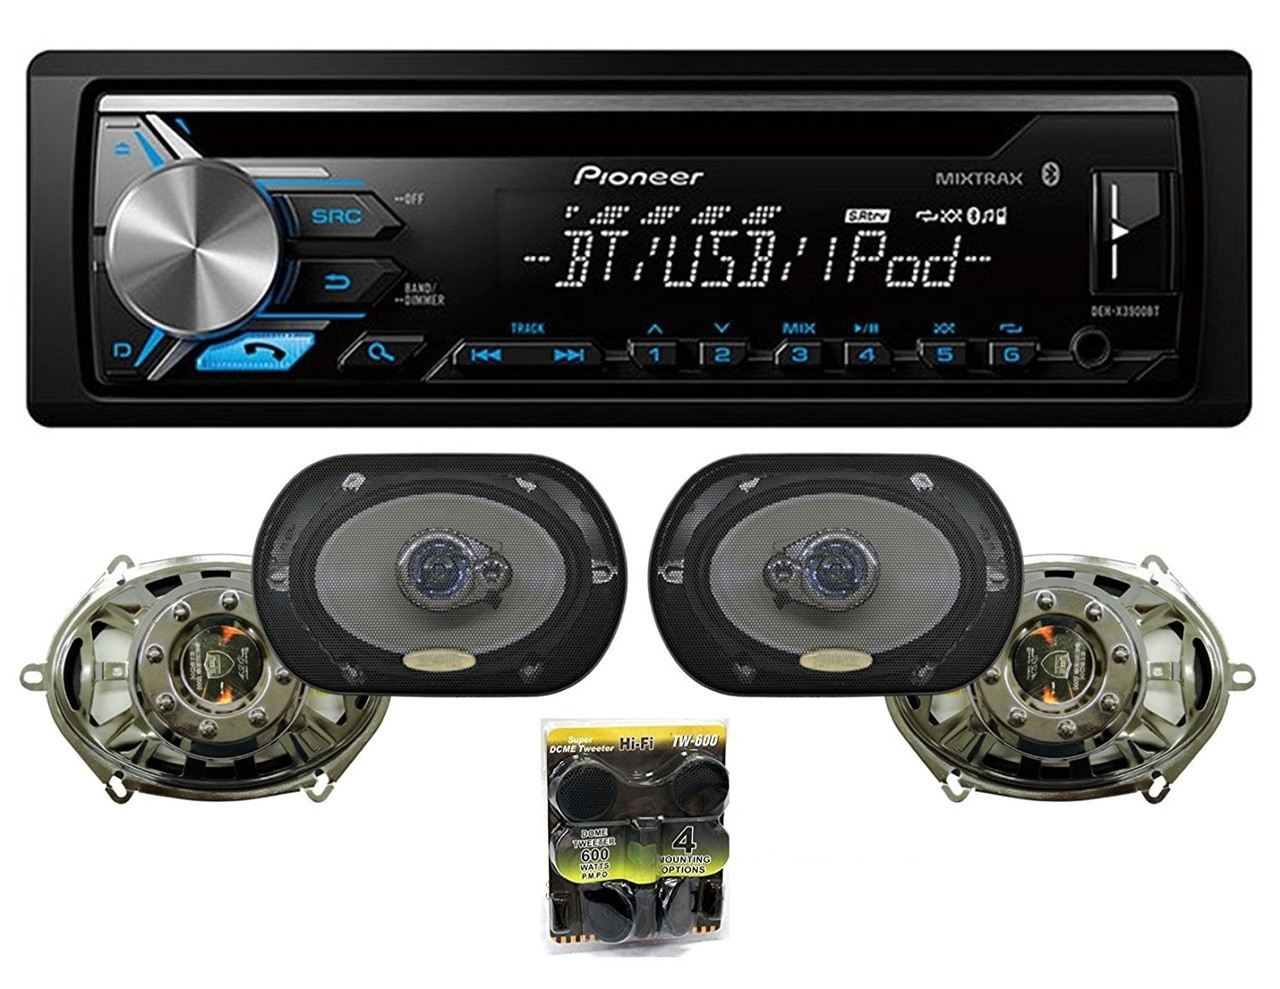 Pioneer DEH-X3900BT Vehicle CD Digital Music Player Receivers, Black With 2 Pairs Of Absolute HQ573 6x8 Speakers And Free TW600 Tweeter